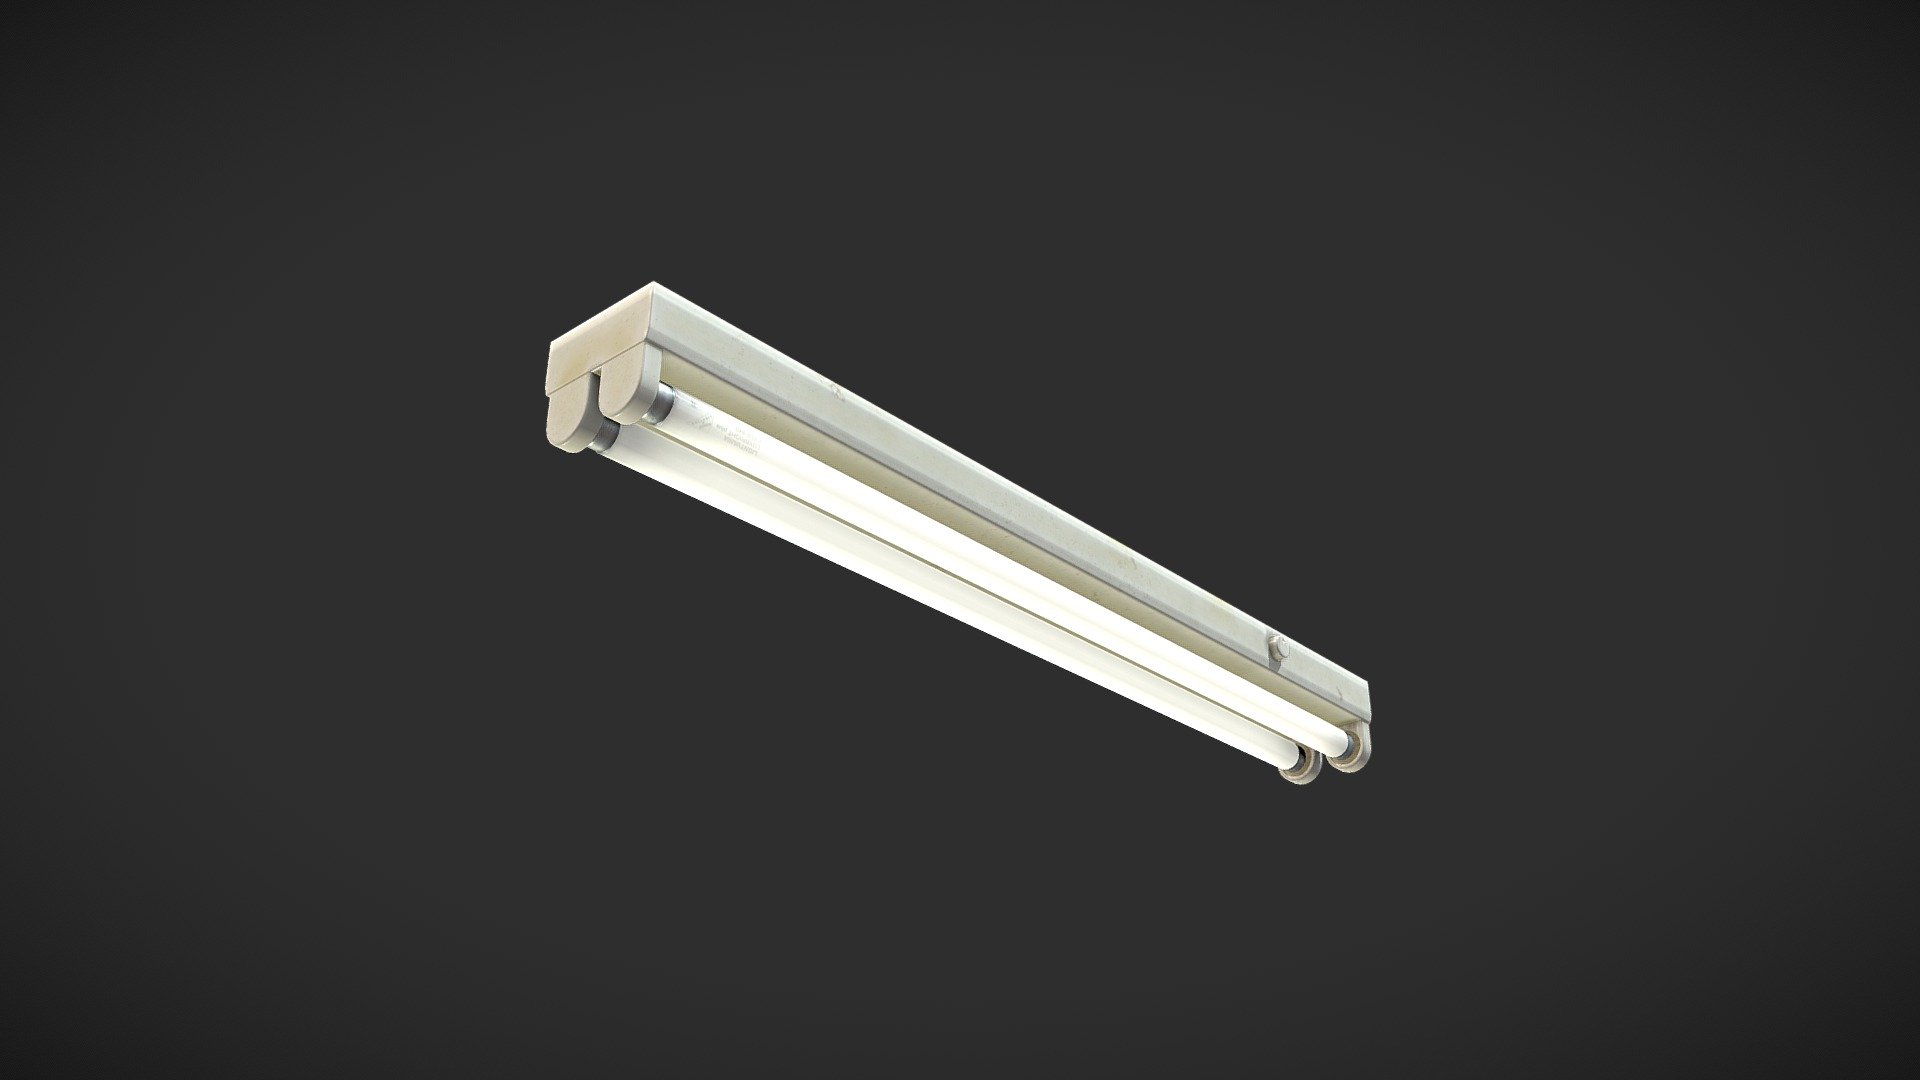 Lowpoly fluorescent lamp with 1800 polys. All quads, real measures, centered in 0,0 coordinates and PBR textures in 4096 x 4096. Ready to use. 
See the bed for this asset here: https://skfb.ly/oMVtn 
See the Hospital drip for this asset here: https://skfb.ly/oNuup 
See the oxygen gas tank here: https://skfb.ly/oNxK6 
See Medicines hospital cupboard here: https://skfb.ly/oNJYN
See Old Hospital Sink here: https://skfb.ly/oNYDU - Fluorescent tube - Buy Royalty Free 3D model by markusenes 3d model